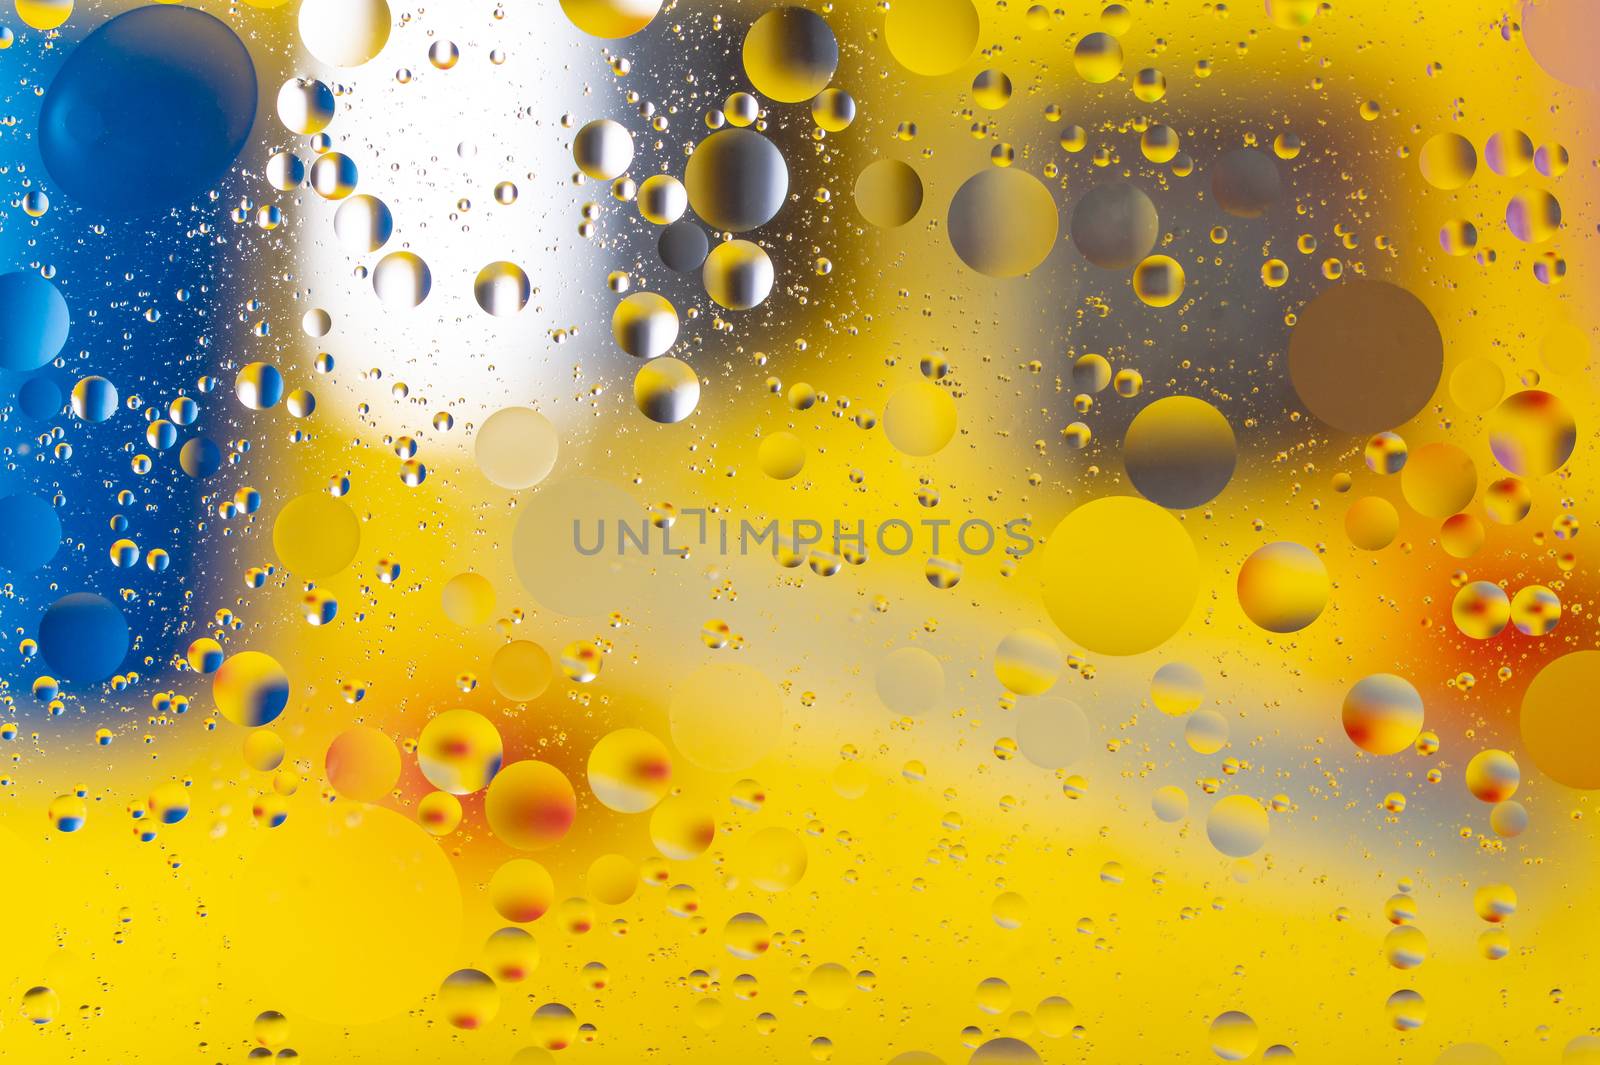 The abstract composition with oil drops in water. 